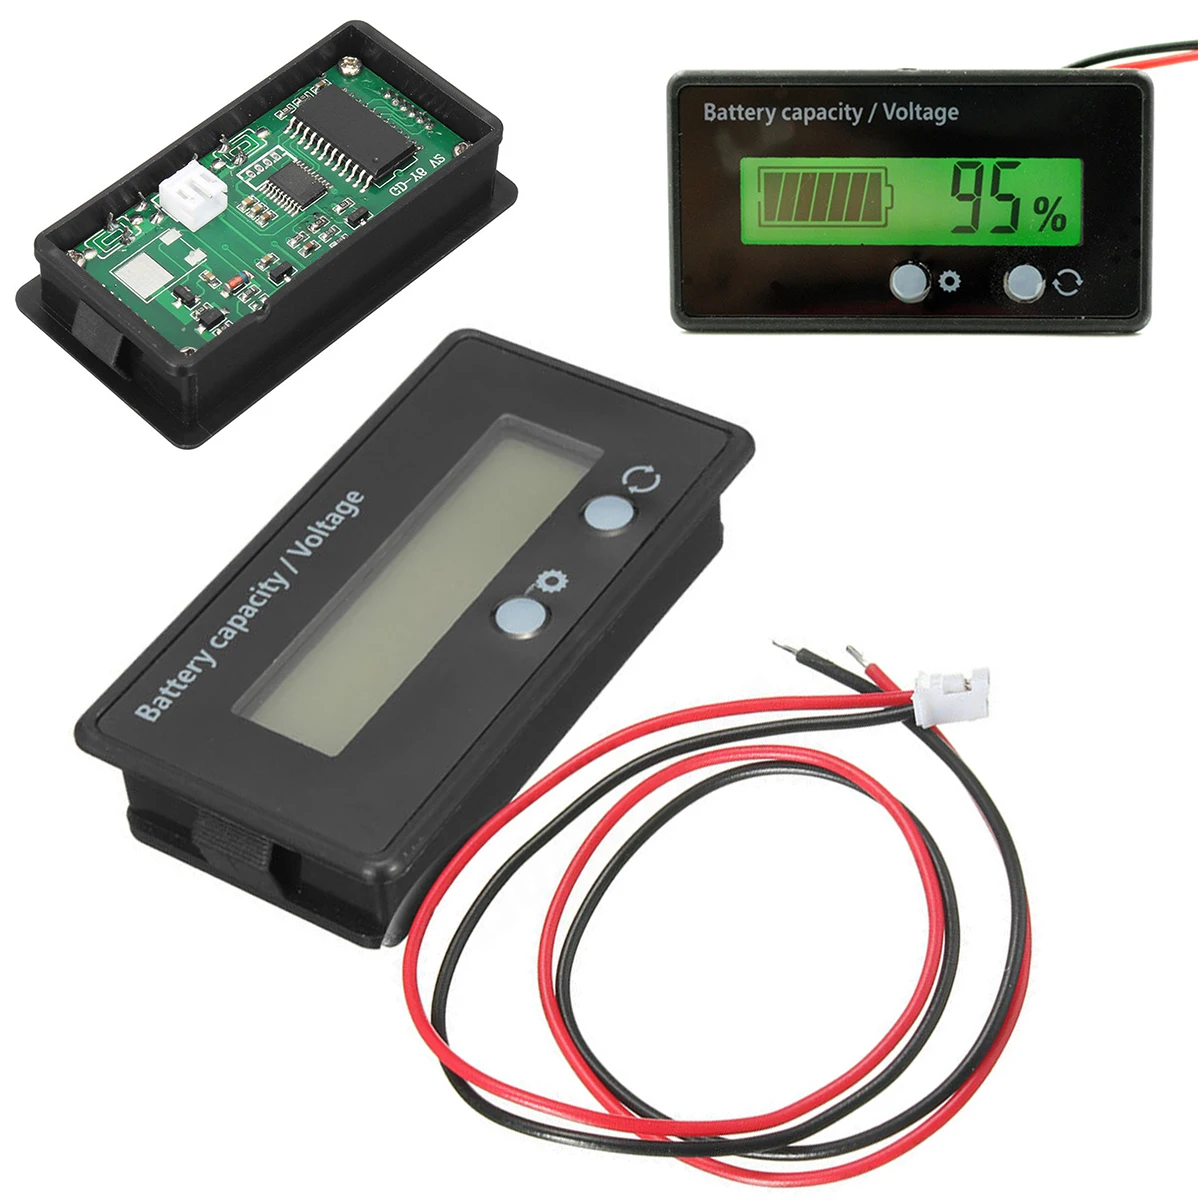 mansum 1PC Electrical components 12V Lithium Battery Capacity Tester Panel Electric Power Display Indicator Board 